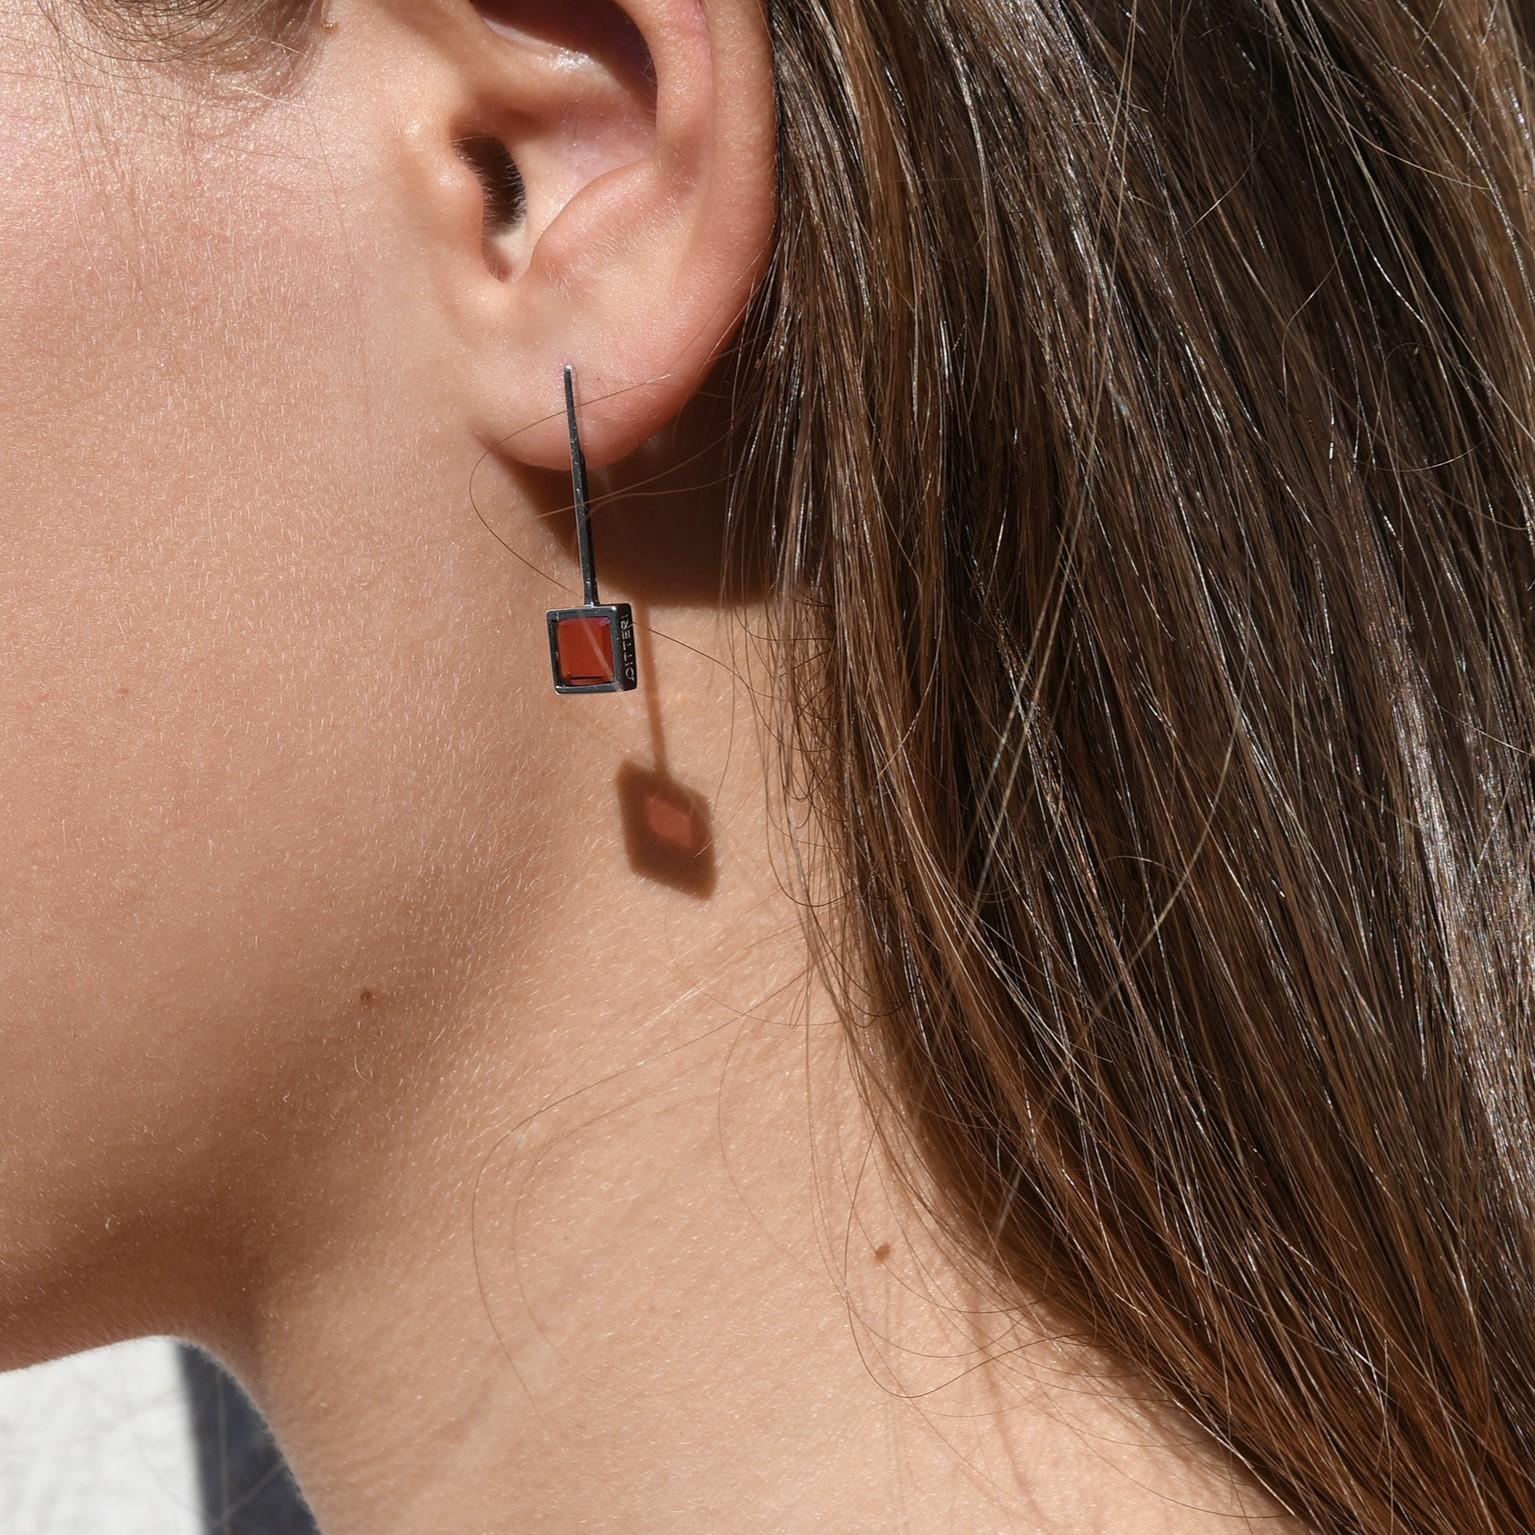 These innovative and contemporary earrings with a unique silhouette were created by designer Michel Tortel for QITTERI. They feature a major innovation: a new gem cut in the form of minimalist squares in a vertical position. In this model, the